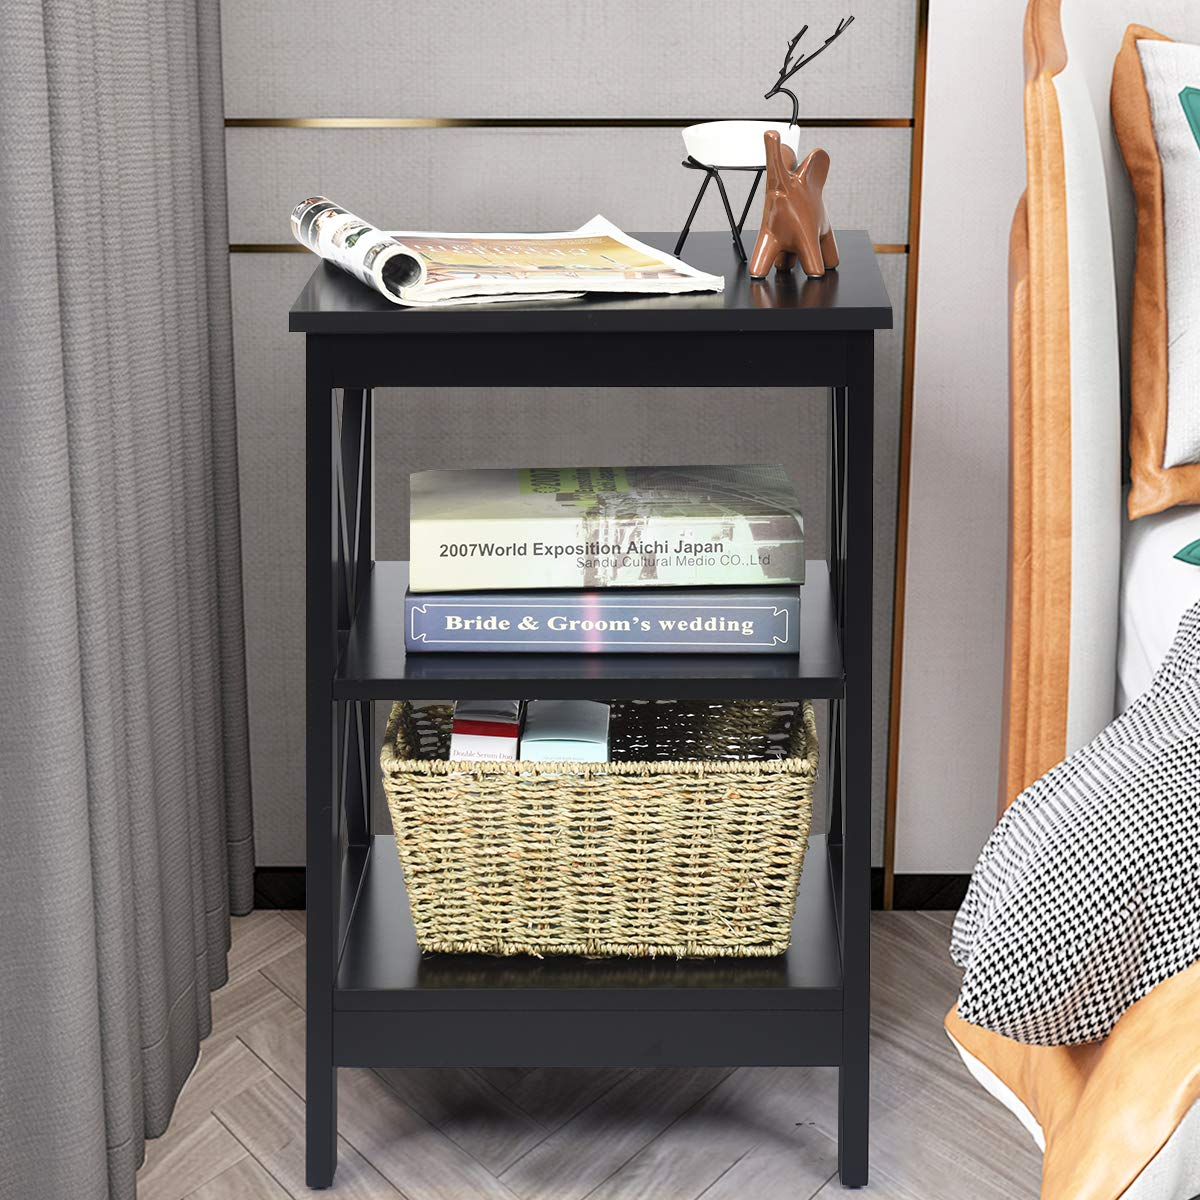 Nightstand 3-Tier X-Design W/Storage Shelves and Stable Structure Storage Organizer Display Sofa Side Table